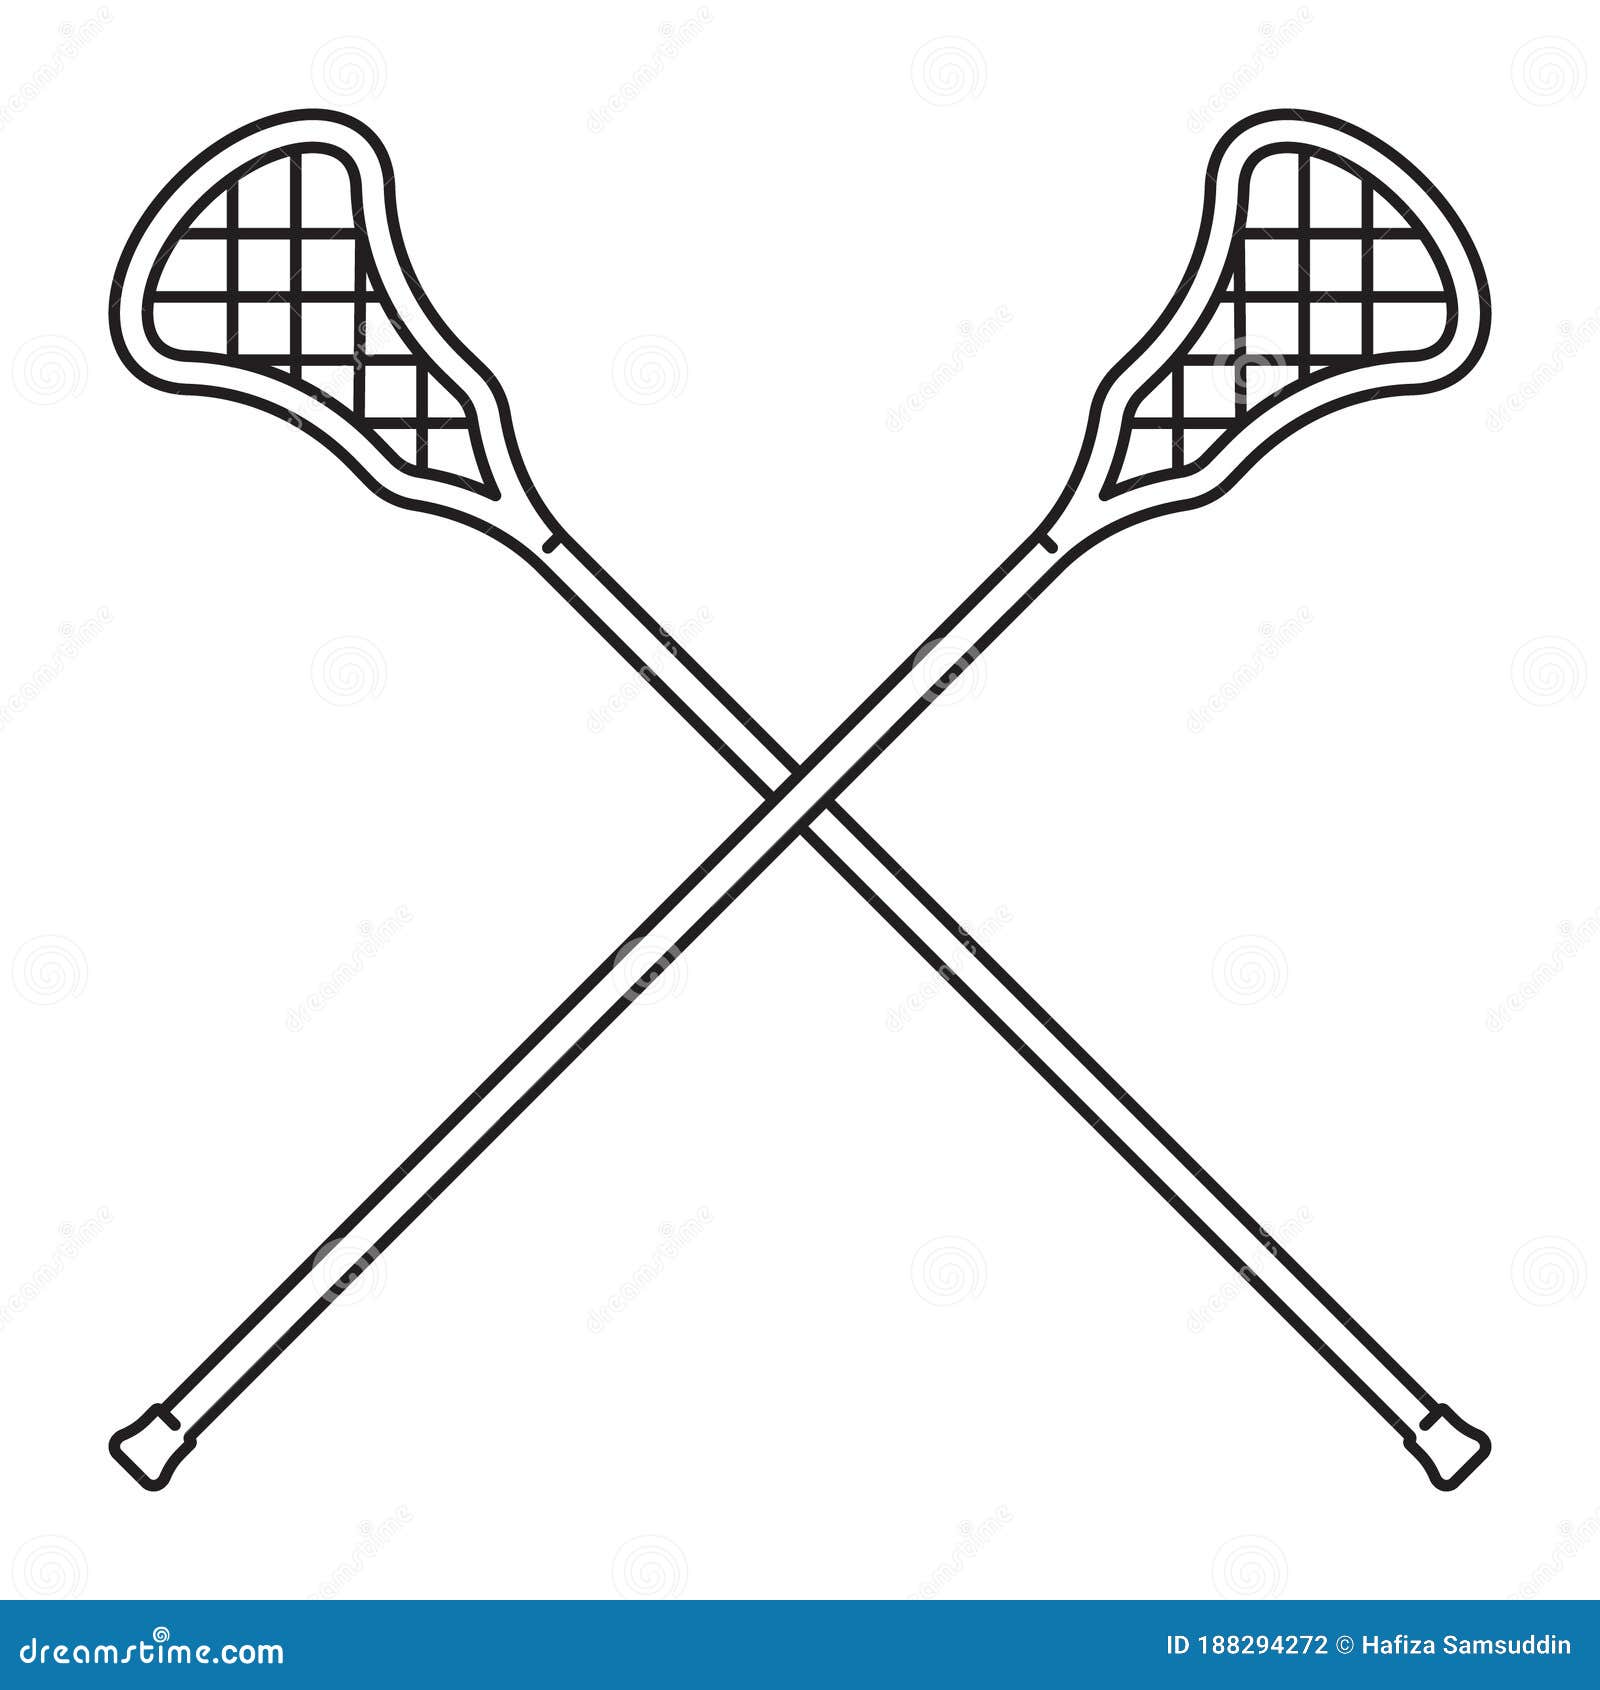 Aesthetic Hand sketch lacrosse drawing for Pencil Drawing Ideas